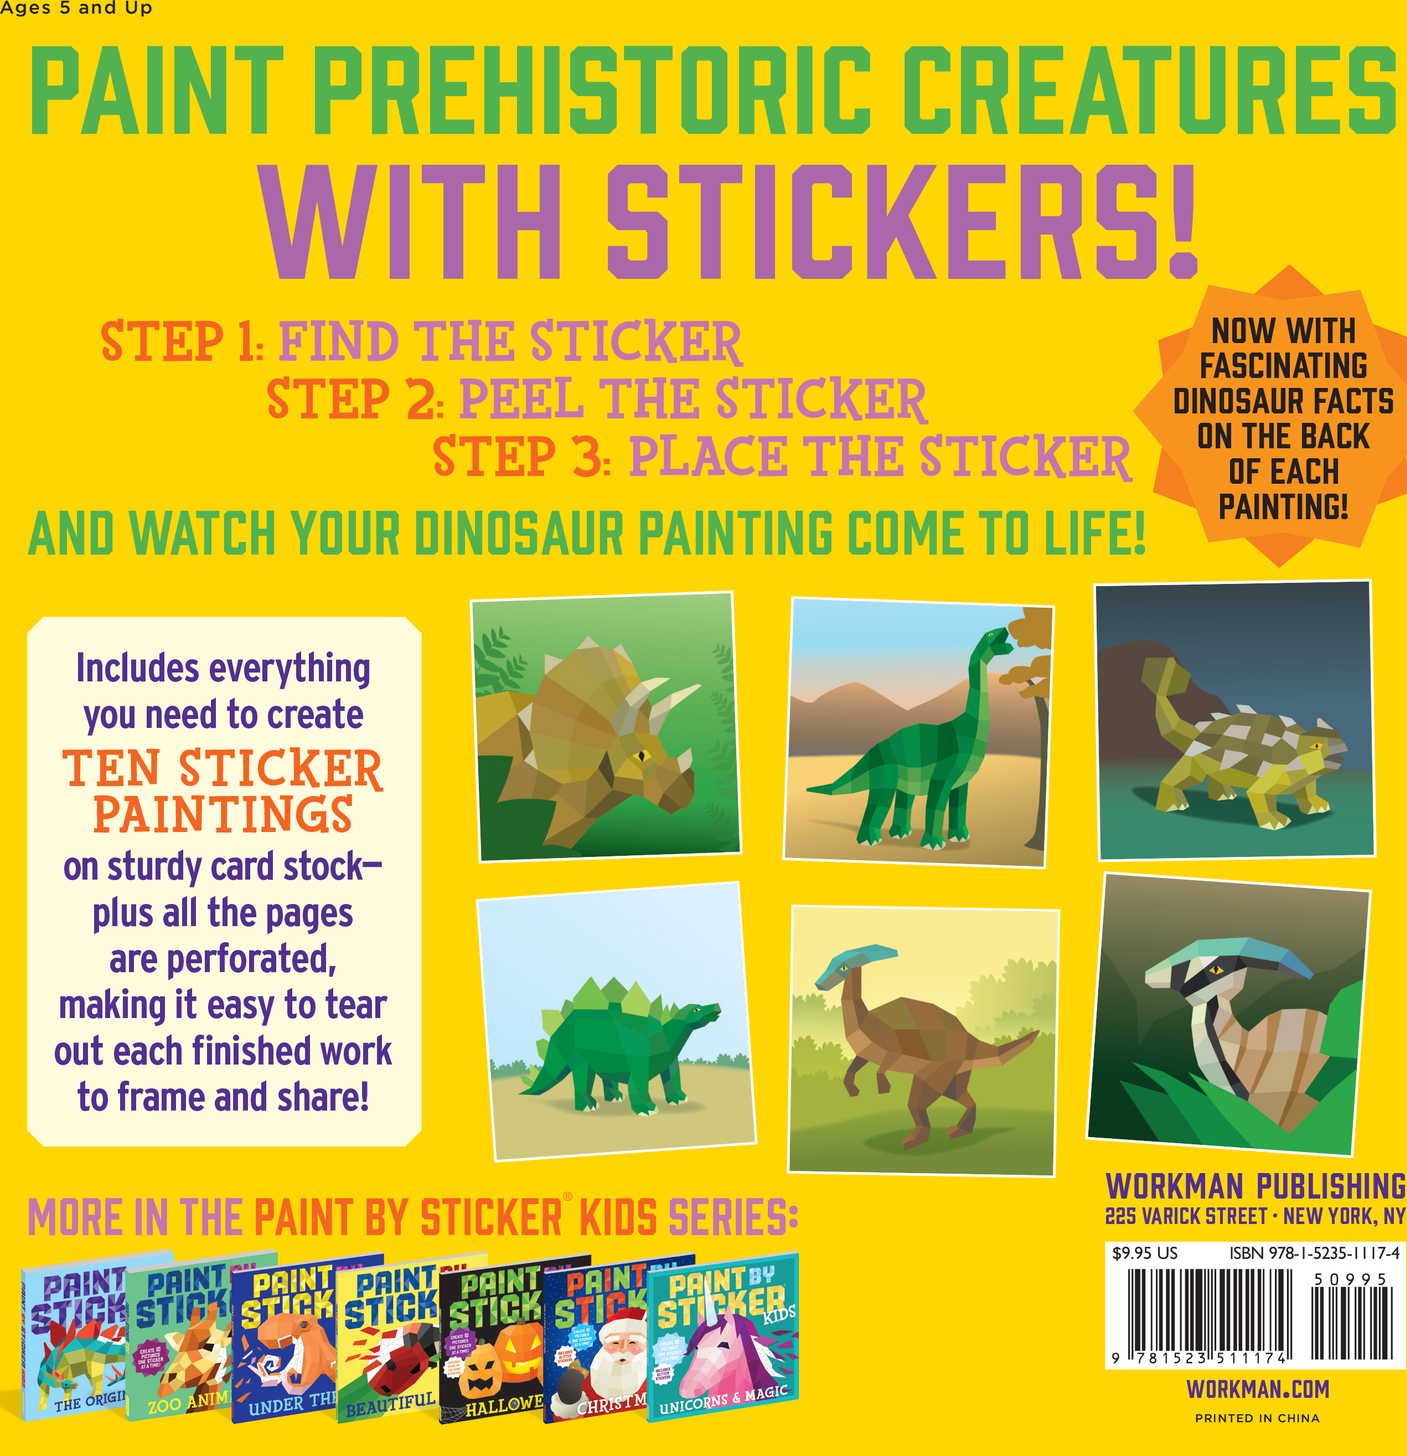 Paint by Sticker Kids: Dinosaurs: Create 10 Pictures One Sticker at a Time!